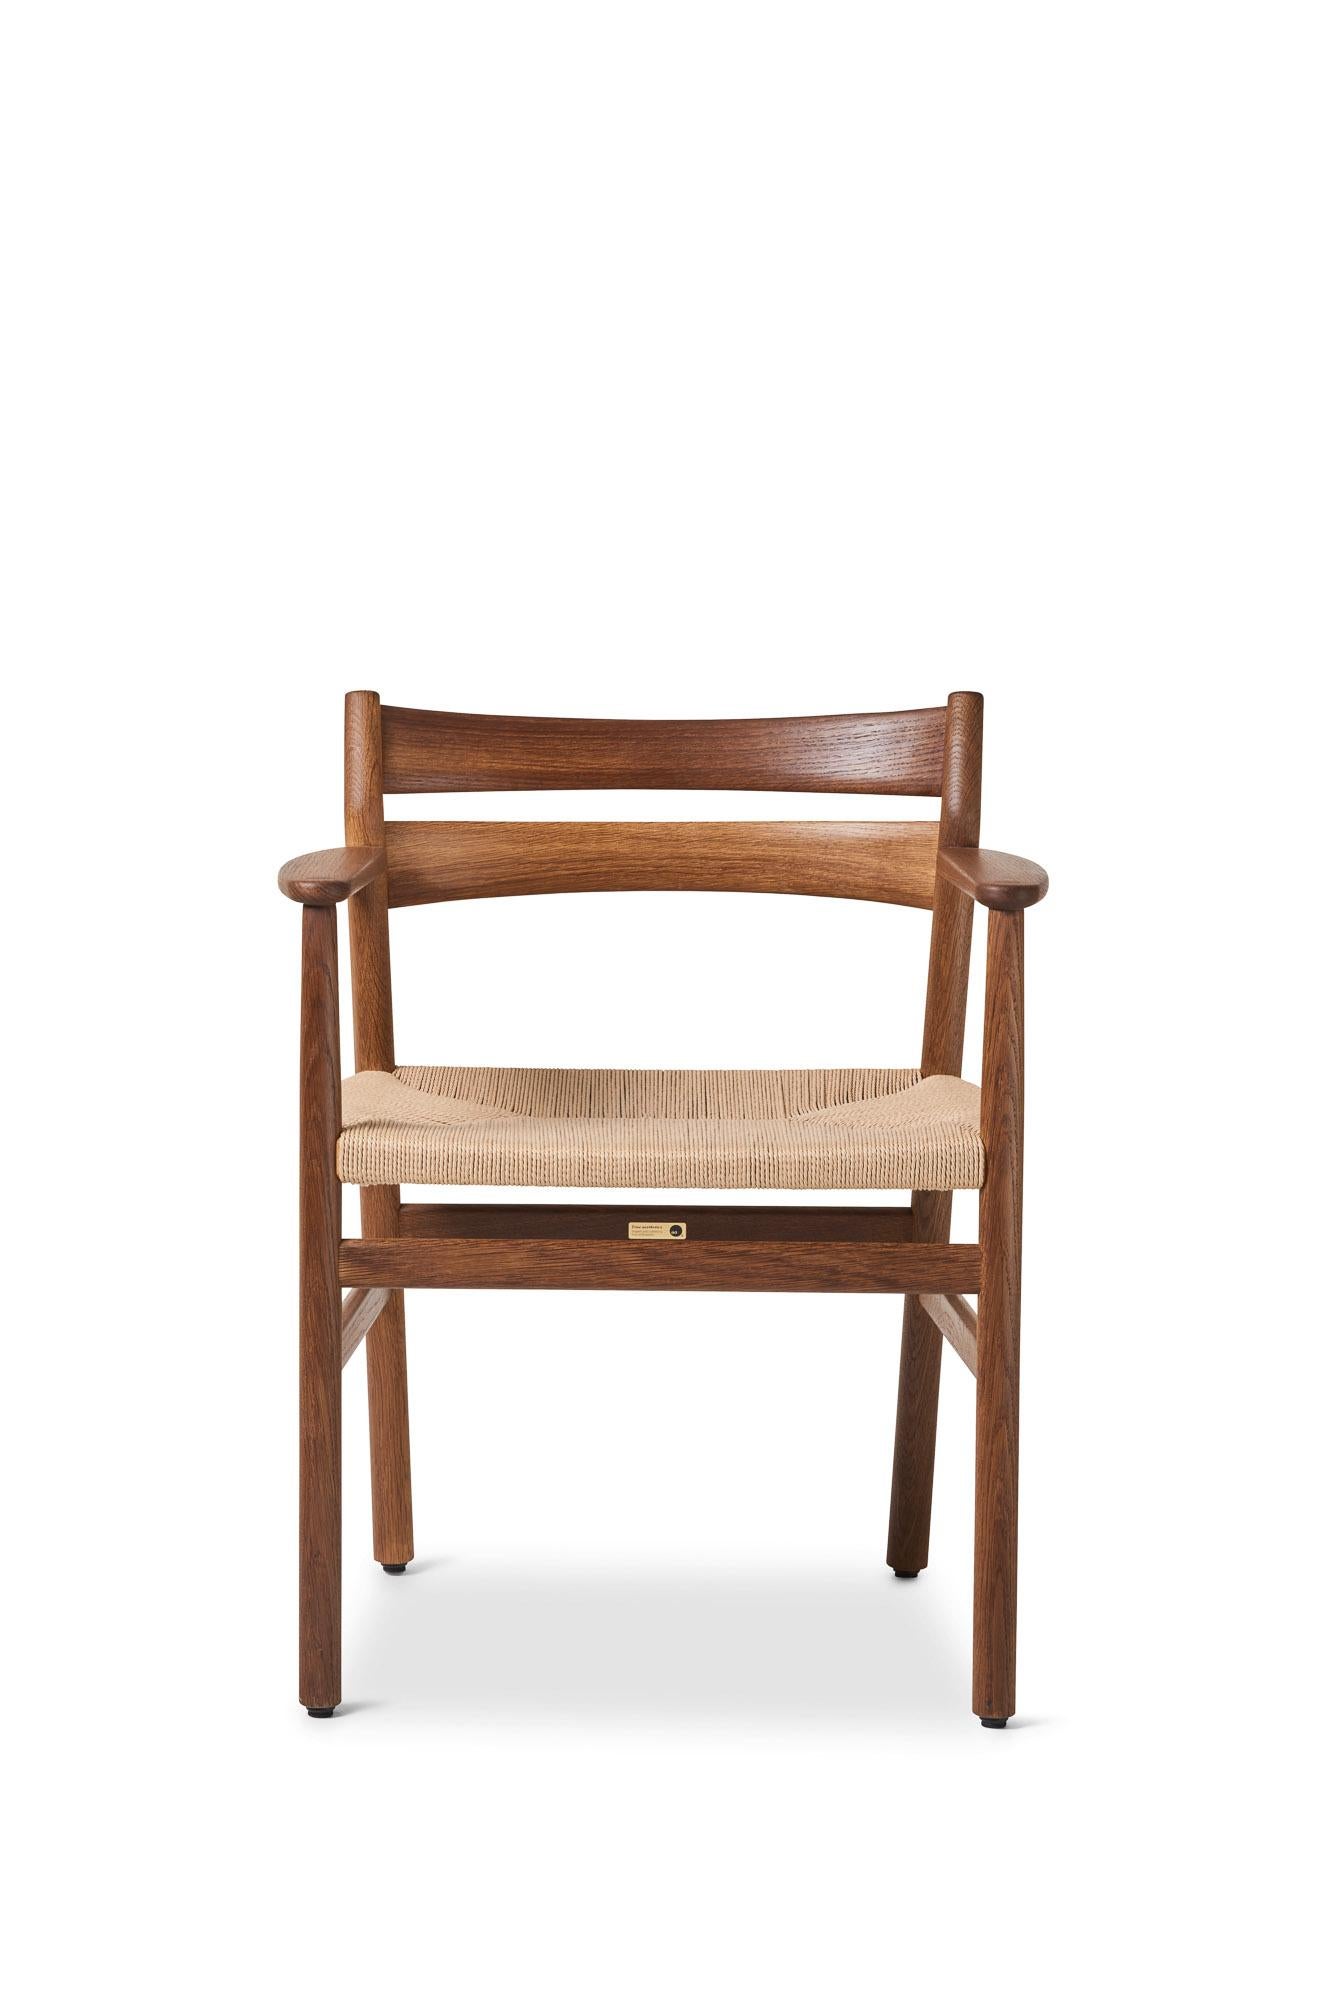 BM2 Chair
Solid oak frame, paper cordel seat
Dimensions : H78 x 44 x 51 cm (seat height 46cm)

Wood:
– Oak
– Smoked oak
– Black lacquered oak

Paper cordel:
– Natural
– Black

-- 
The collection of chairs BM1 and BM2, signed by DK3,